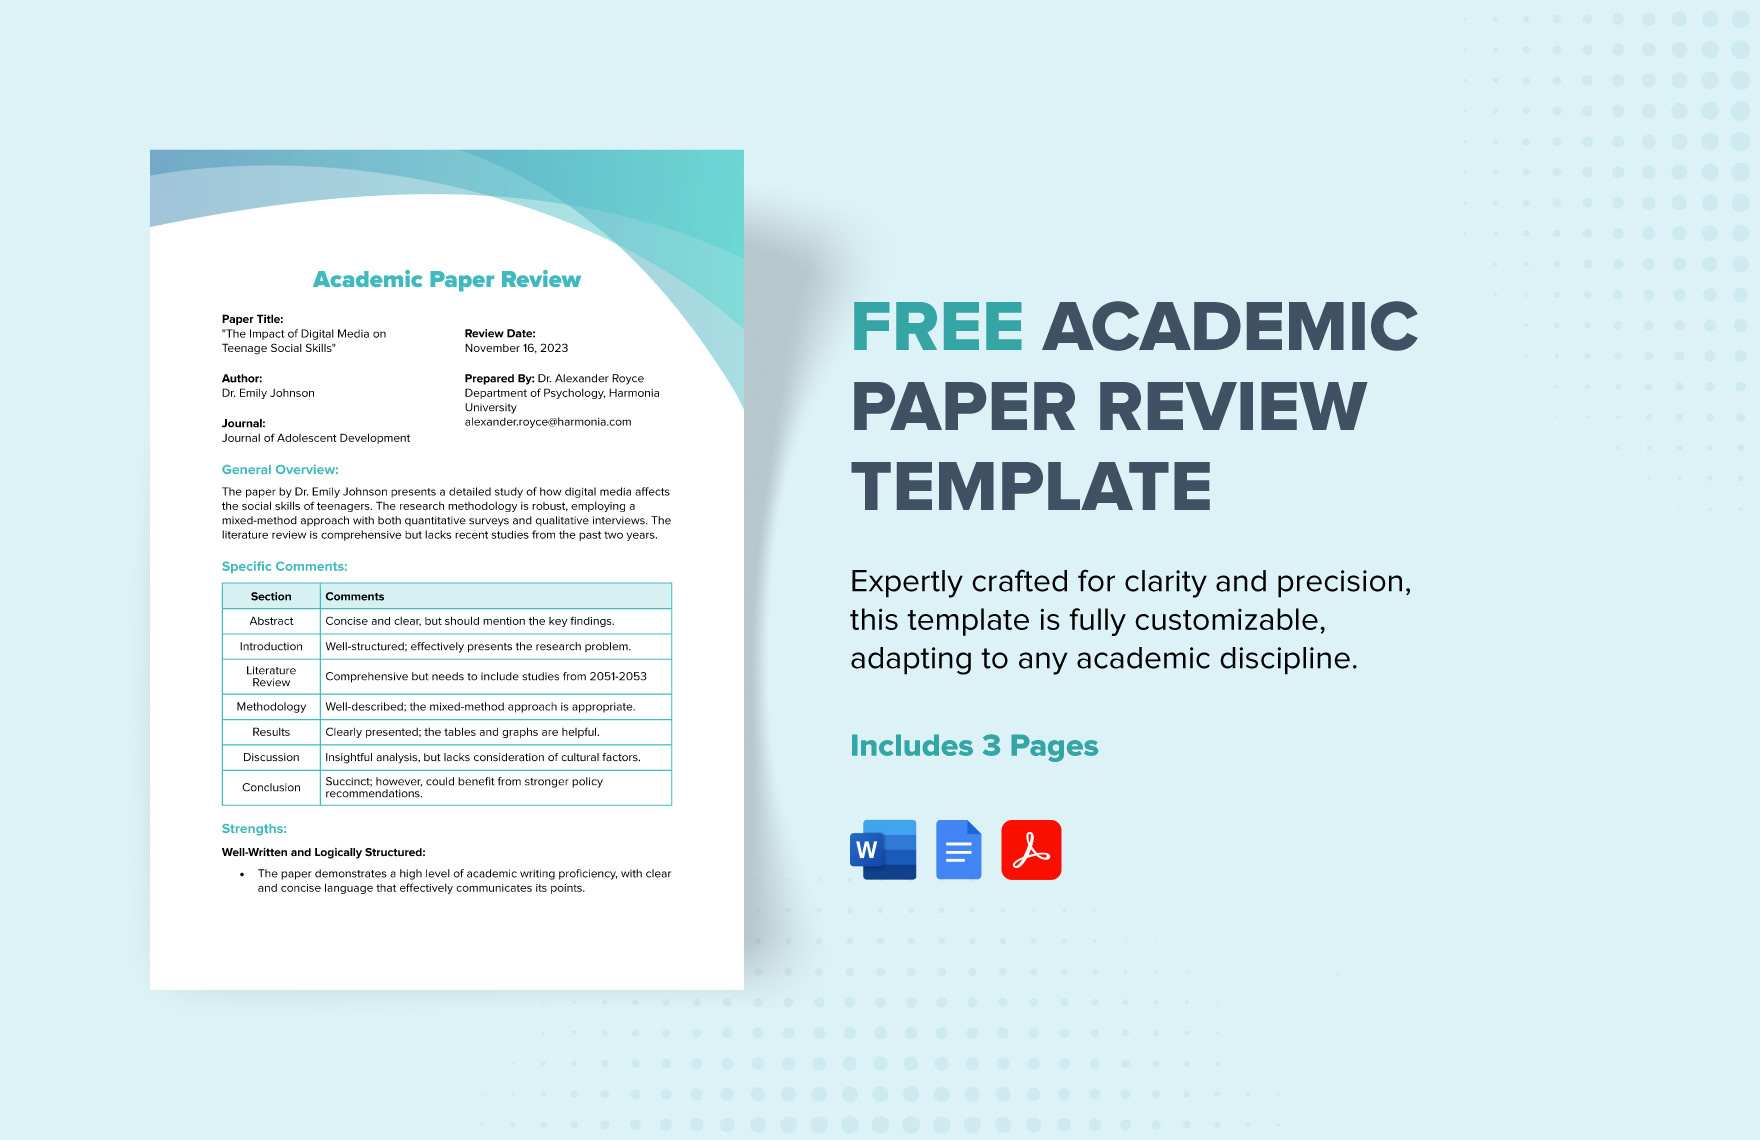 Academic Paper Review Template